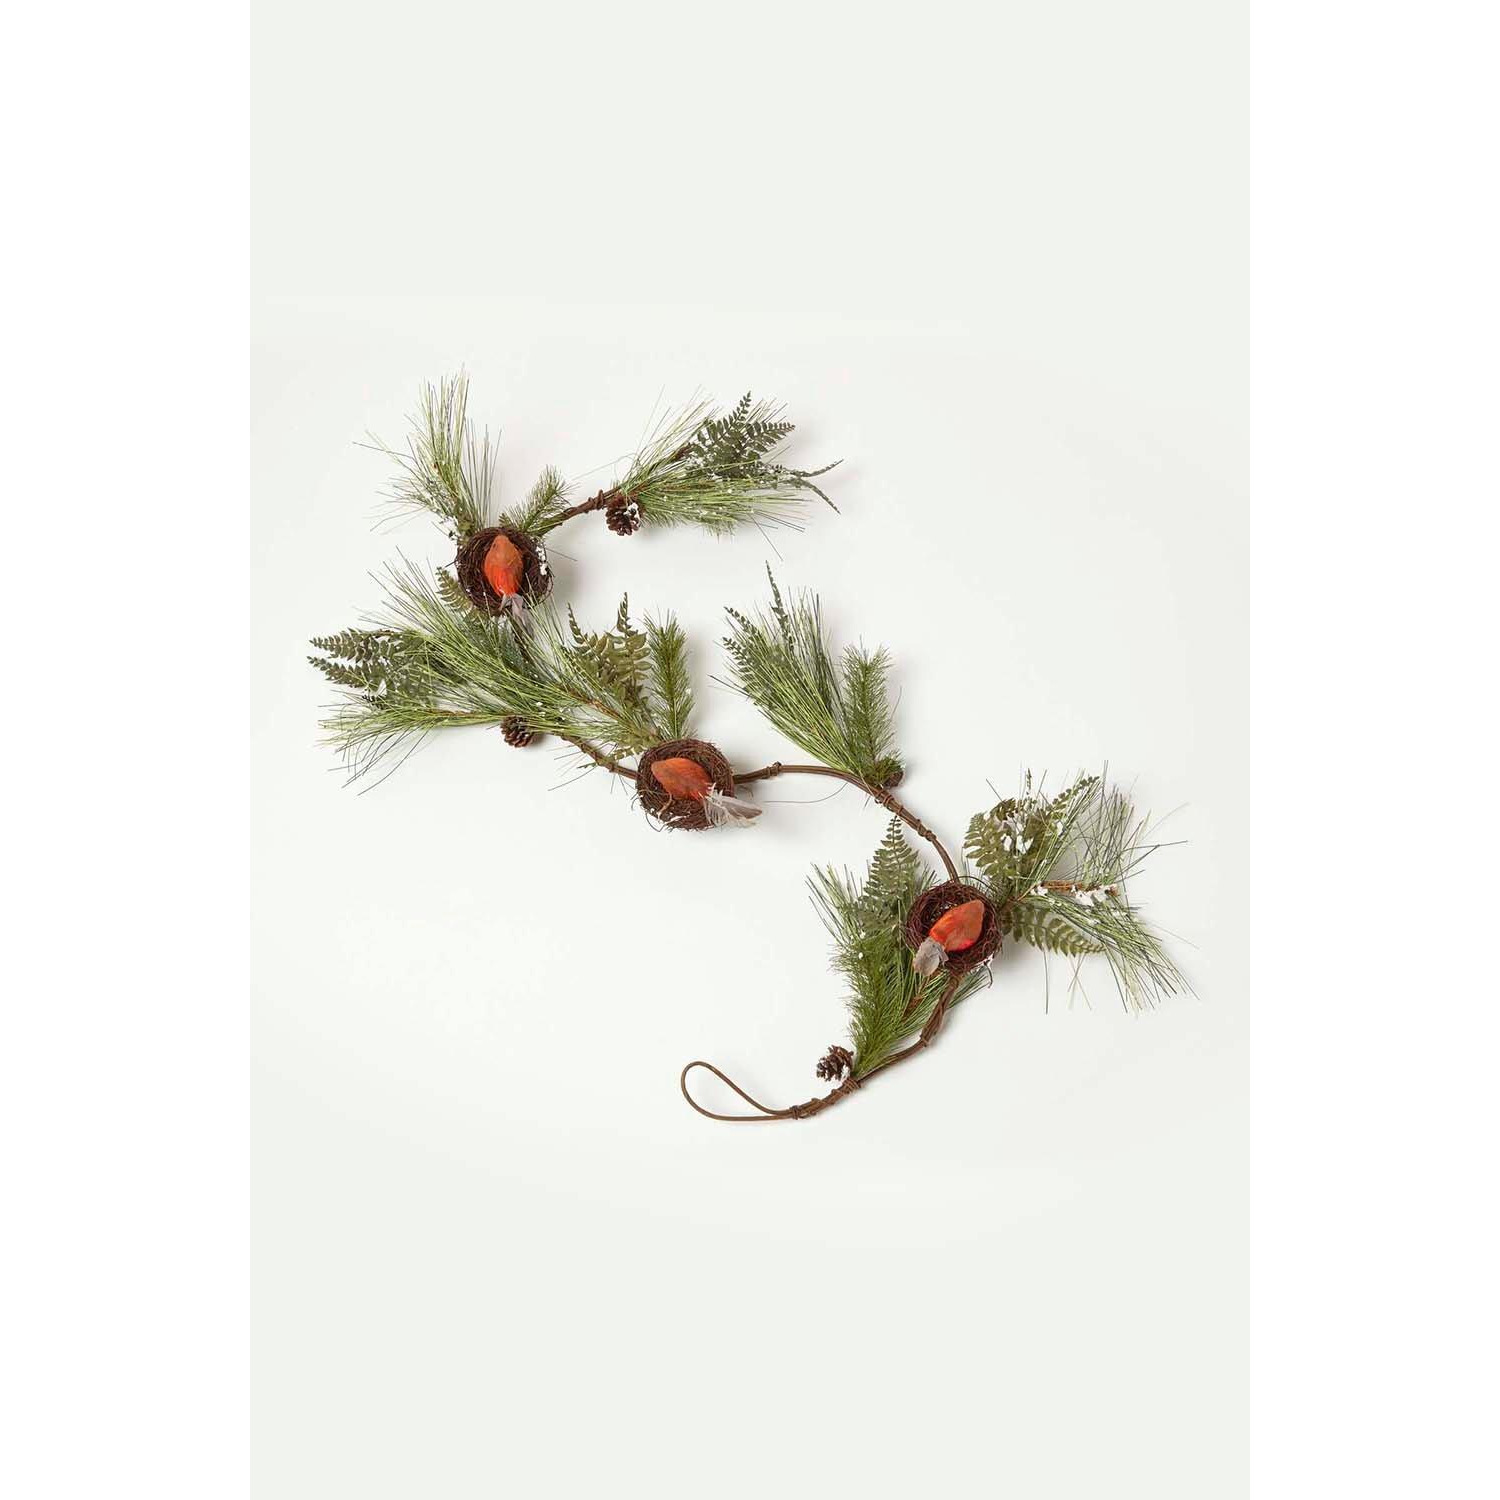 Festive Christmas Garland Artificial Pine and Robins Nests 5ft - image 1